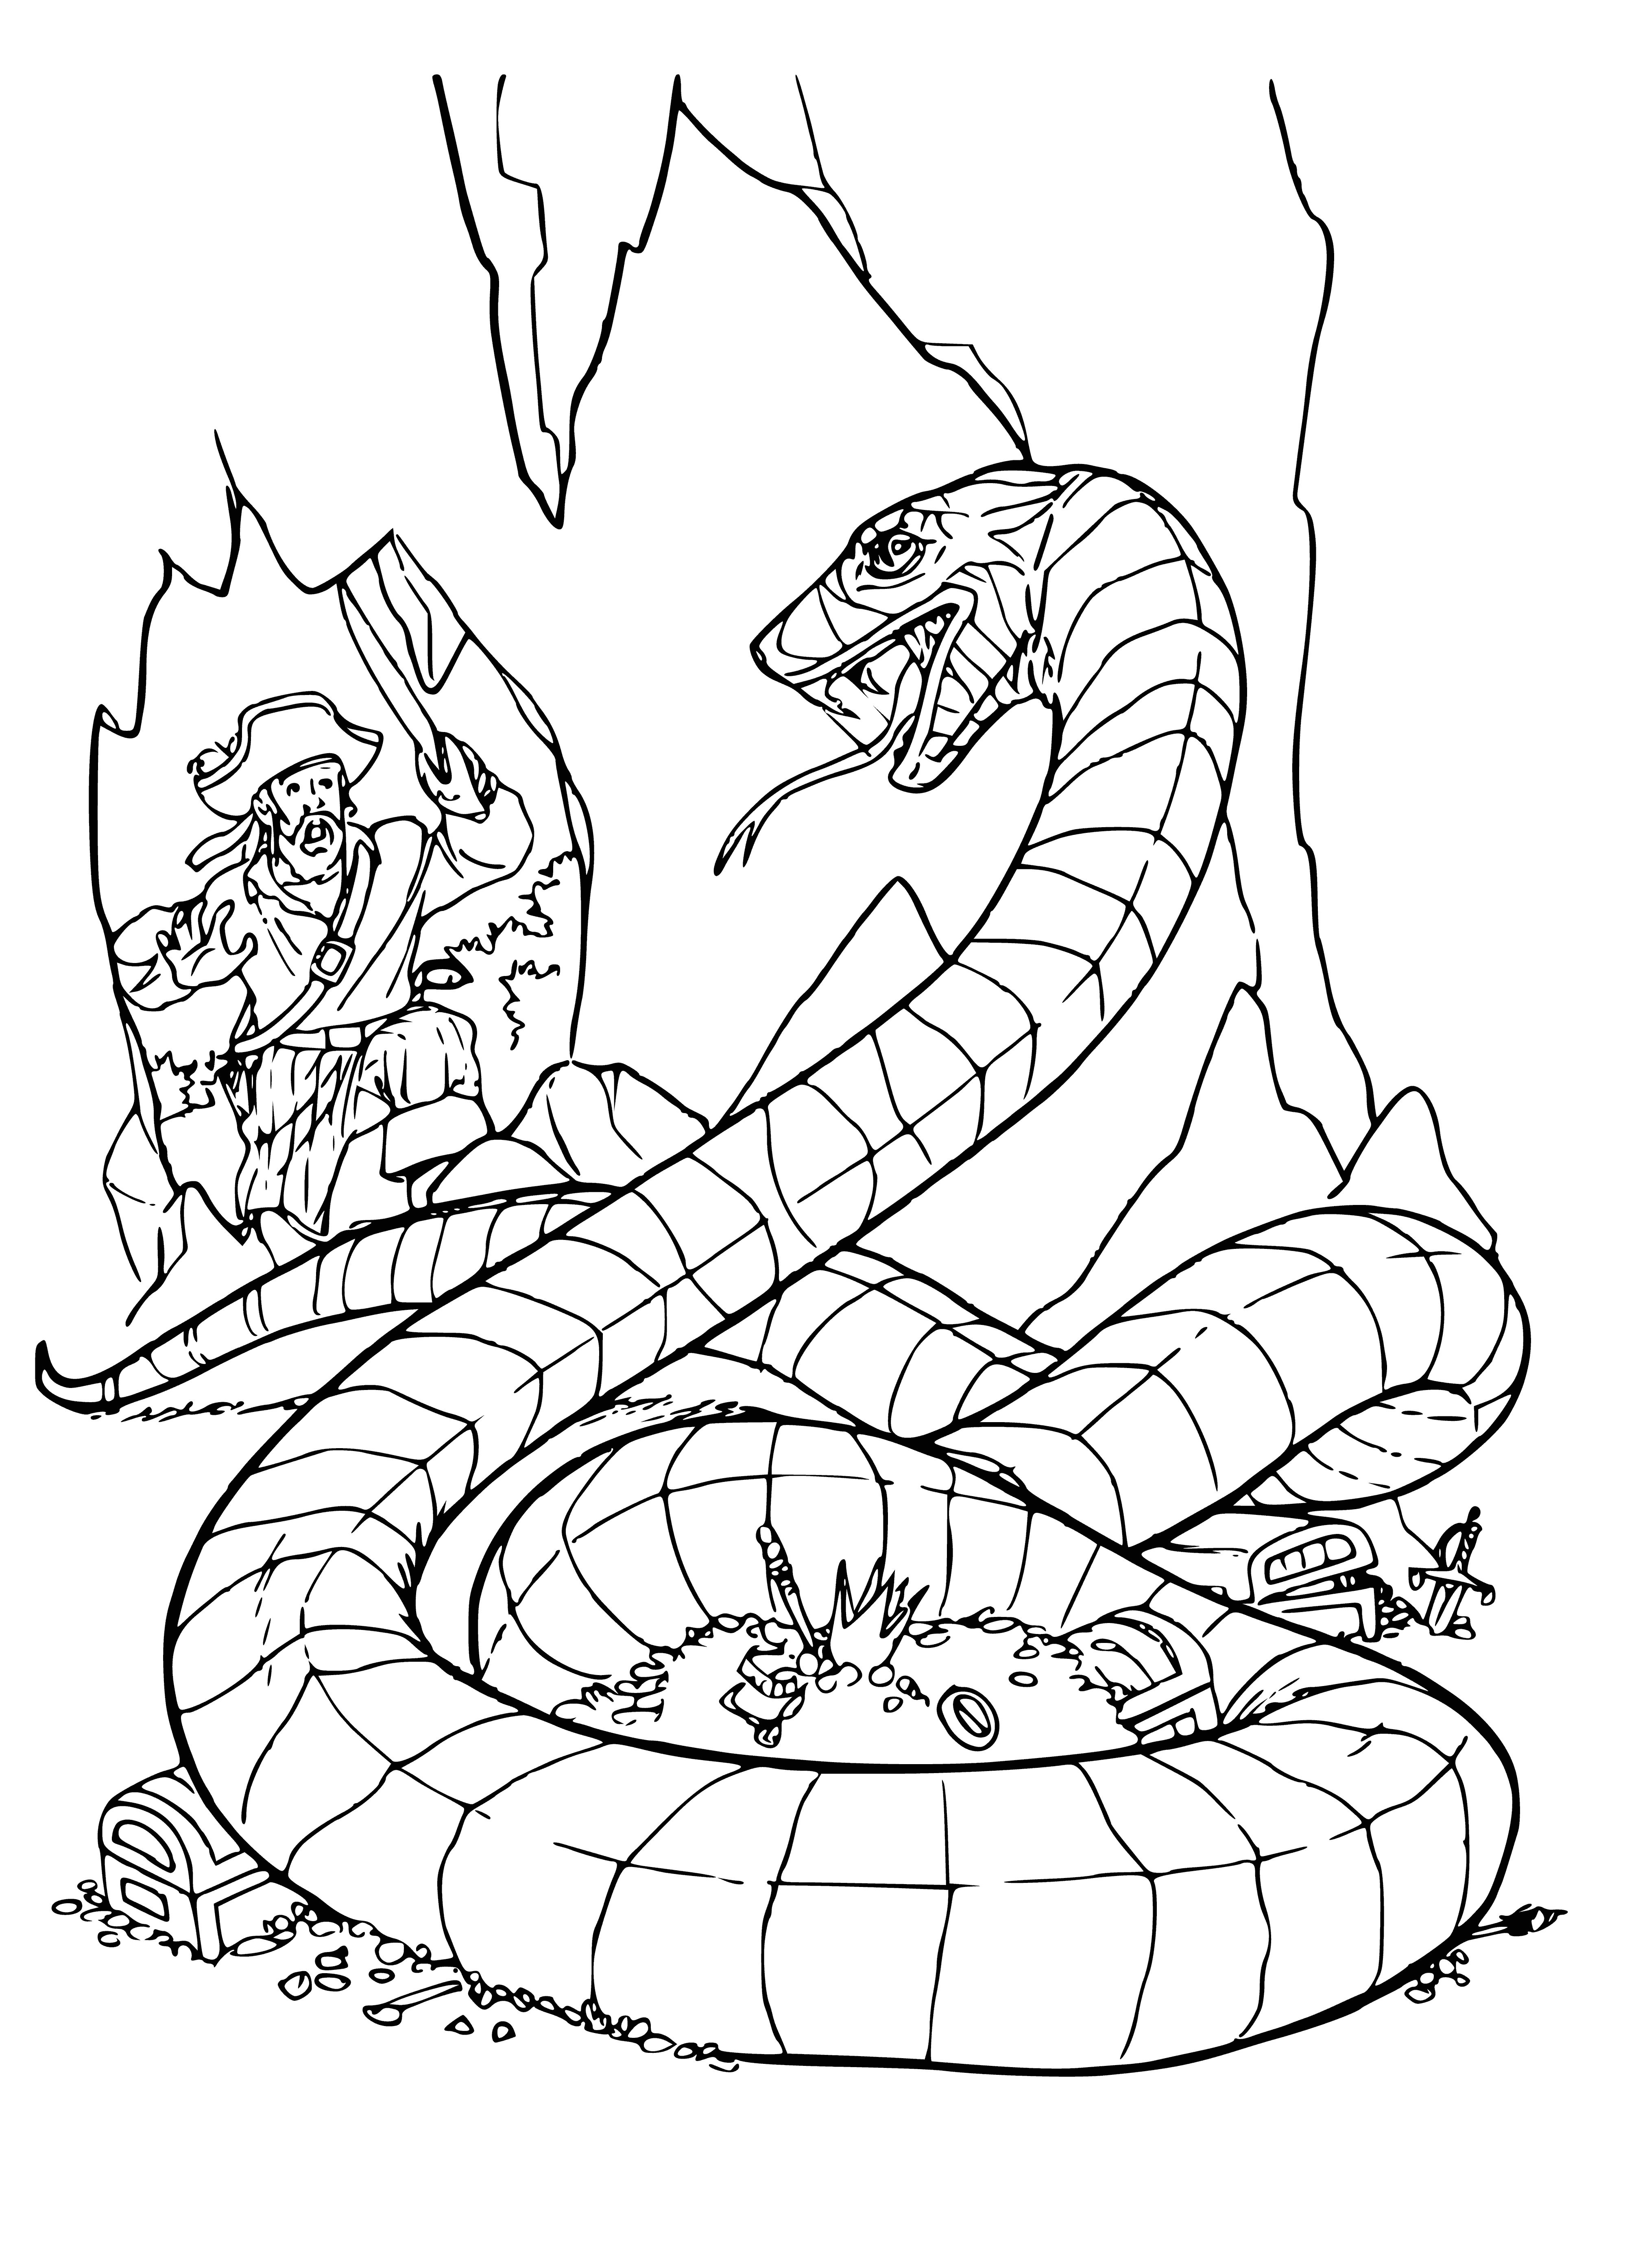 Giant snake coloring page